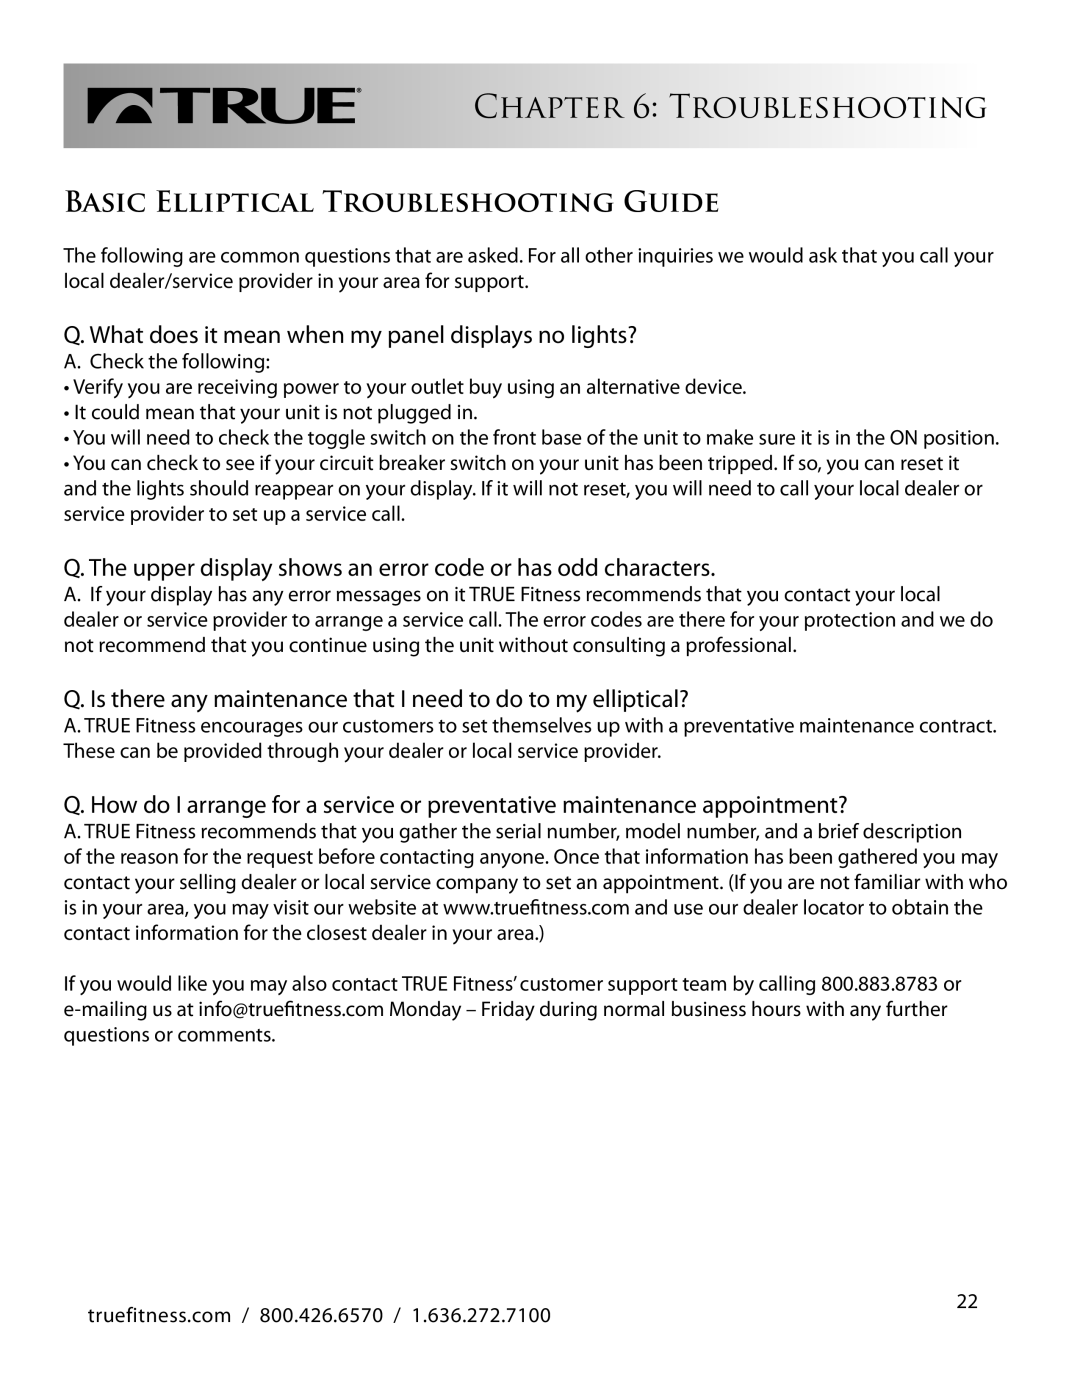 True Fitness CS800 Basic Elliptical Troubleshooting Guide, Q. What does it mean when my panel displays no lights? 